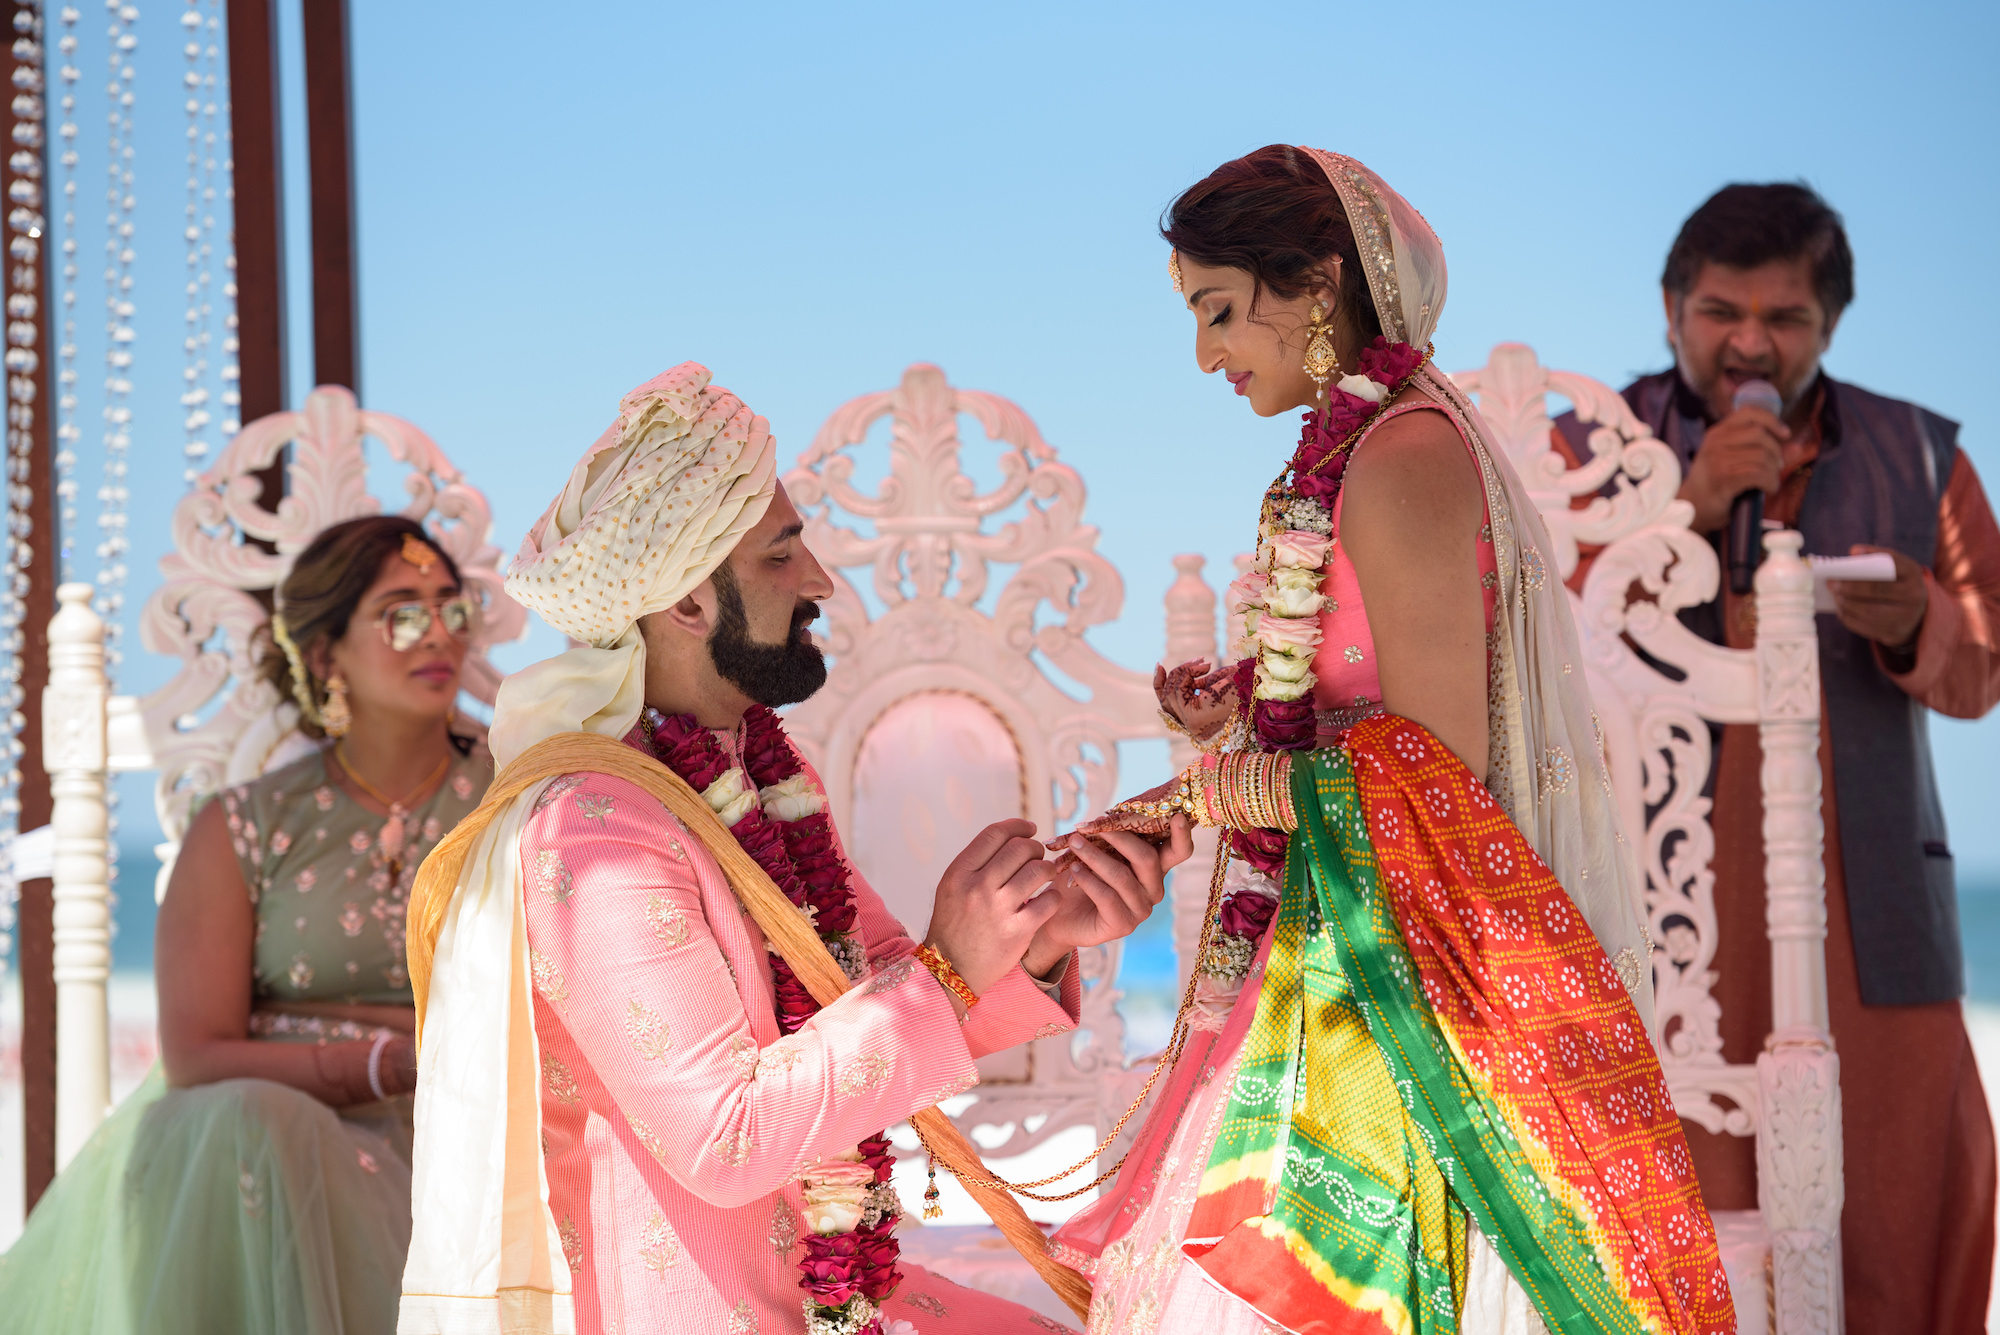 Bride and Groom During Traditional Hindu Wedding Ceremony, Wearing Indian Lehenga and Sari, Groom Wearing Bright Pink and Gold Sherwani and Turban | Florida Hair and Makeup Artists Michele Renee the Studio